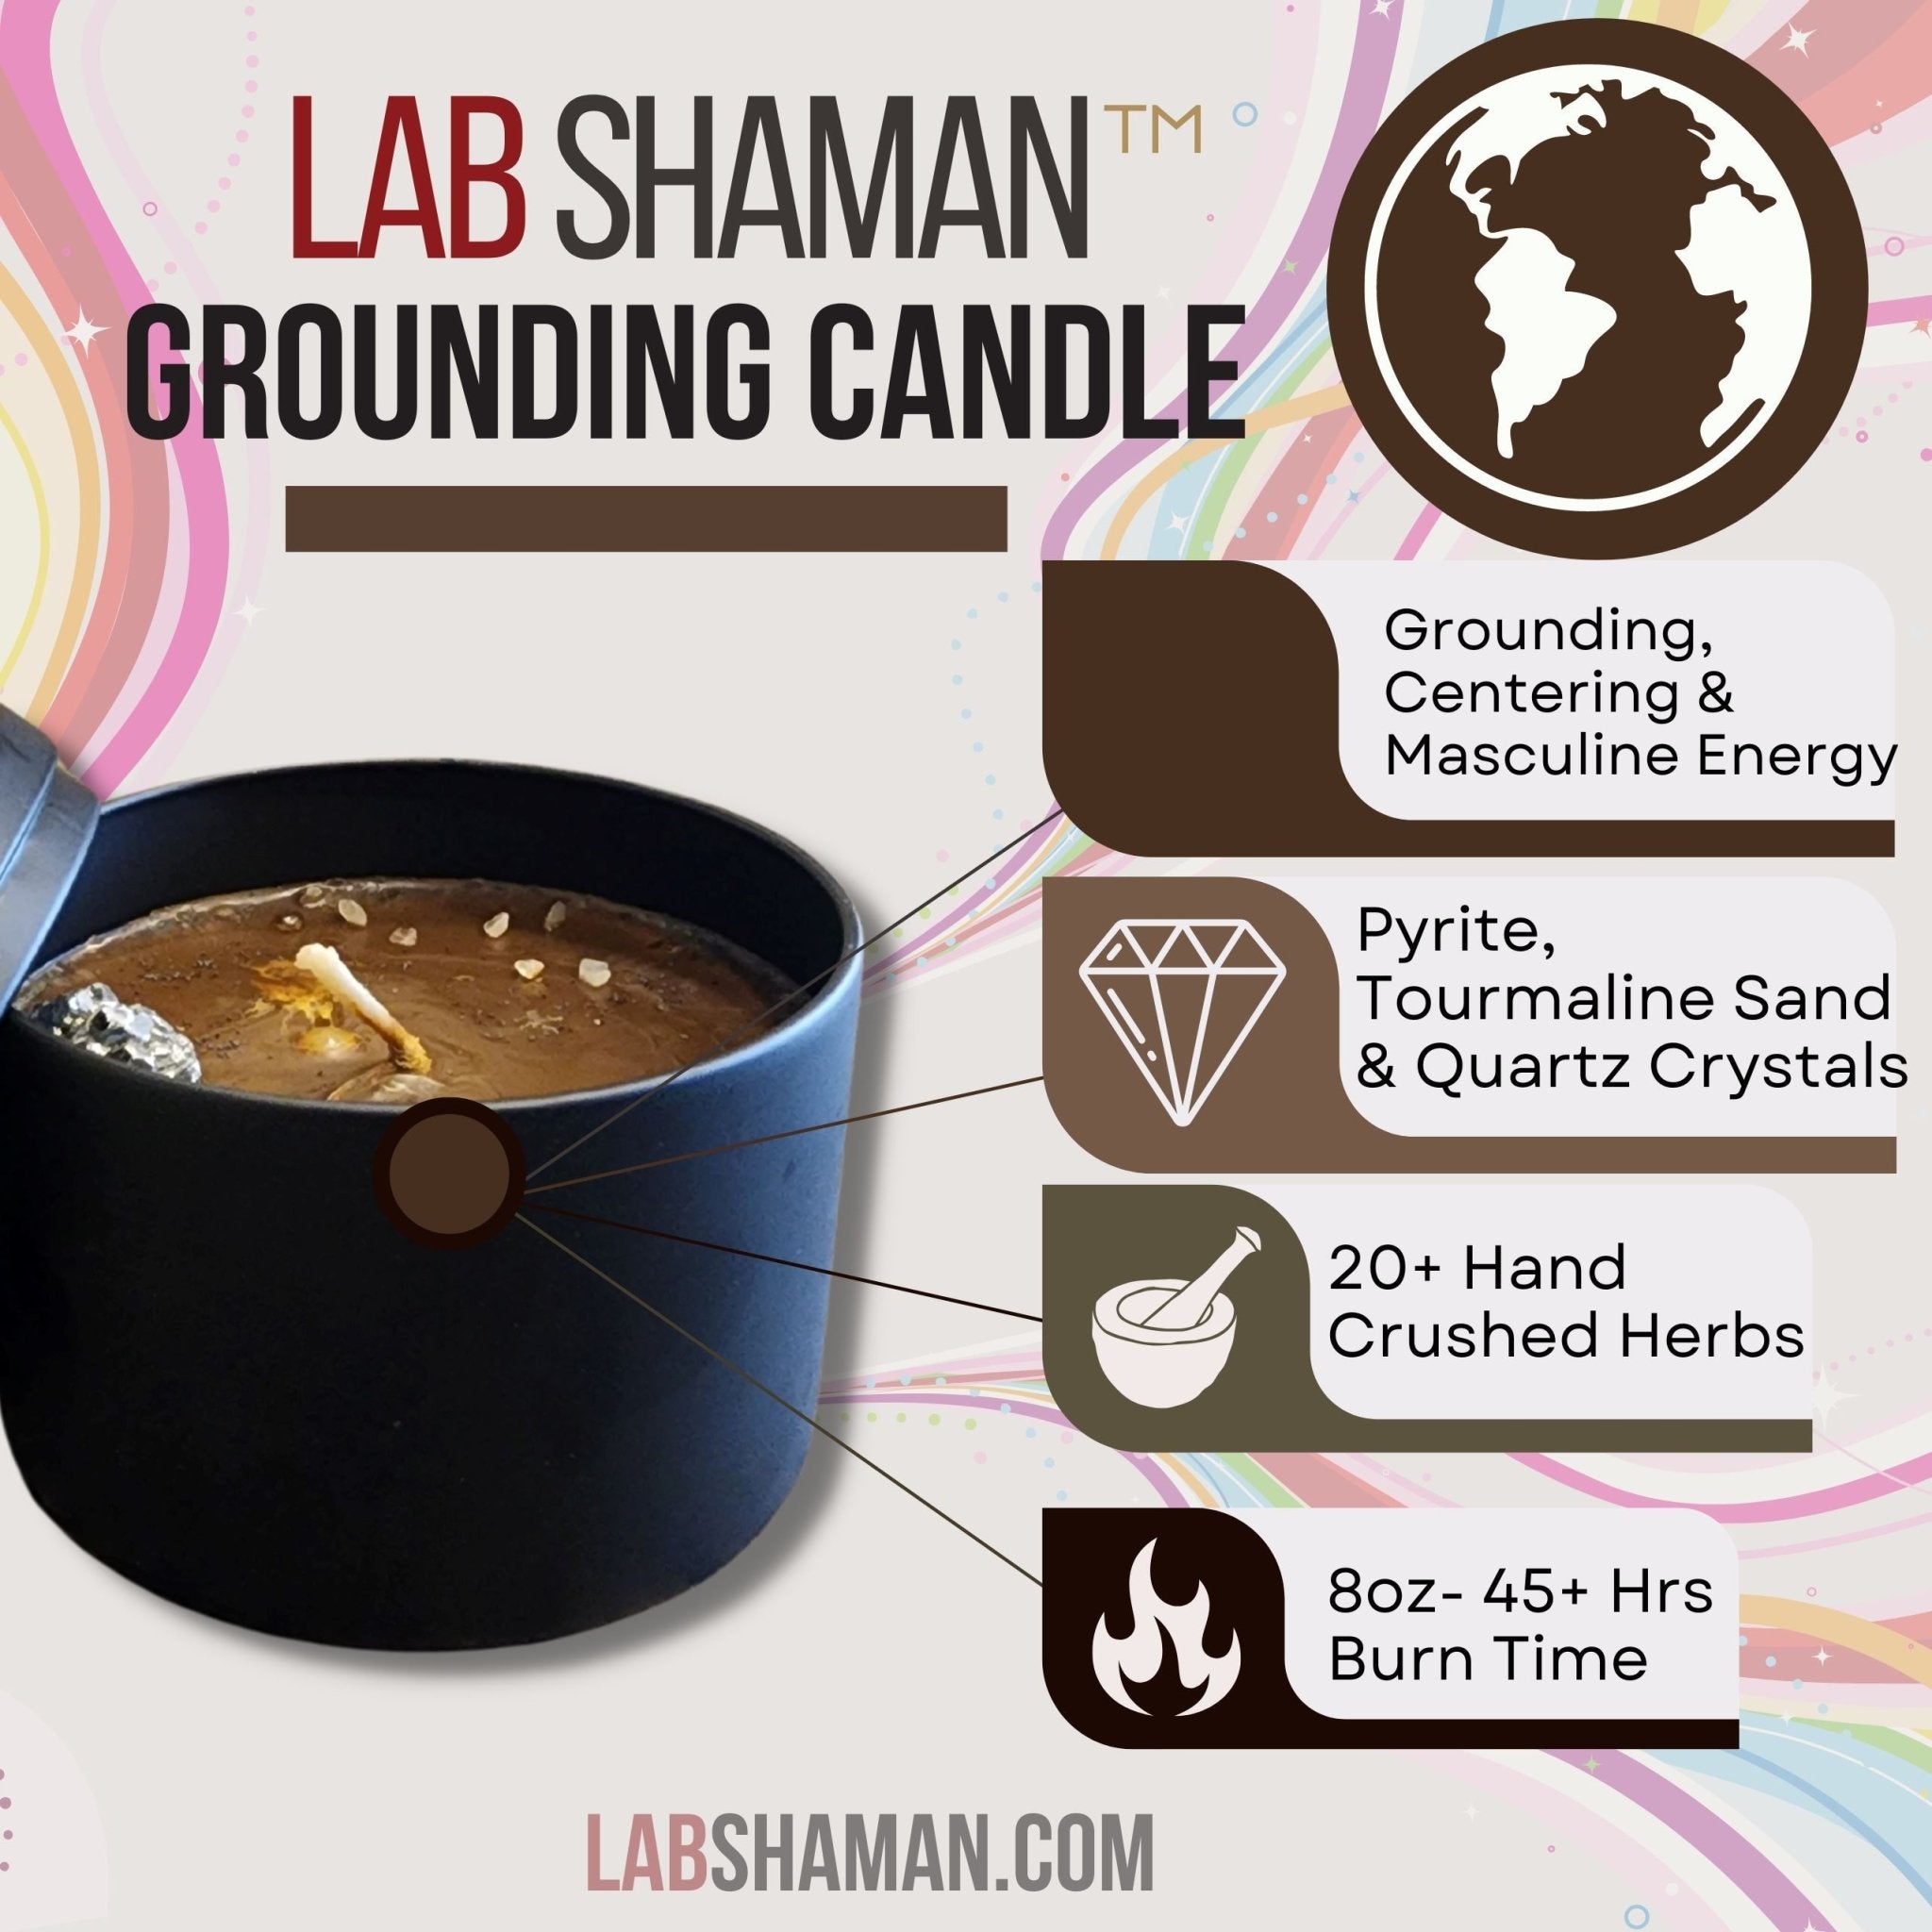  Grounding Candle - For Meditation, Masculine Energy & Centering  | LAB Shaman by LABShaman sold by LABShaman